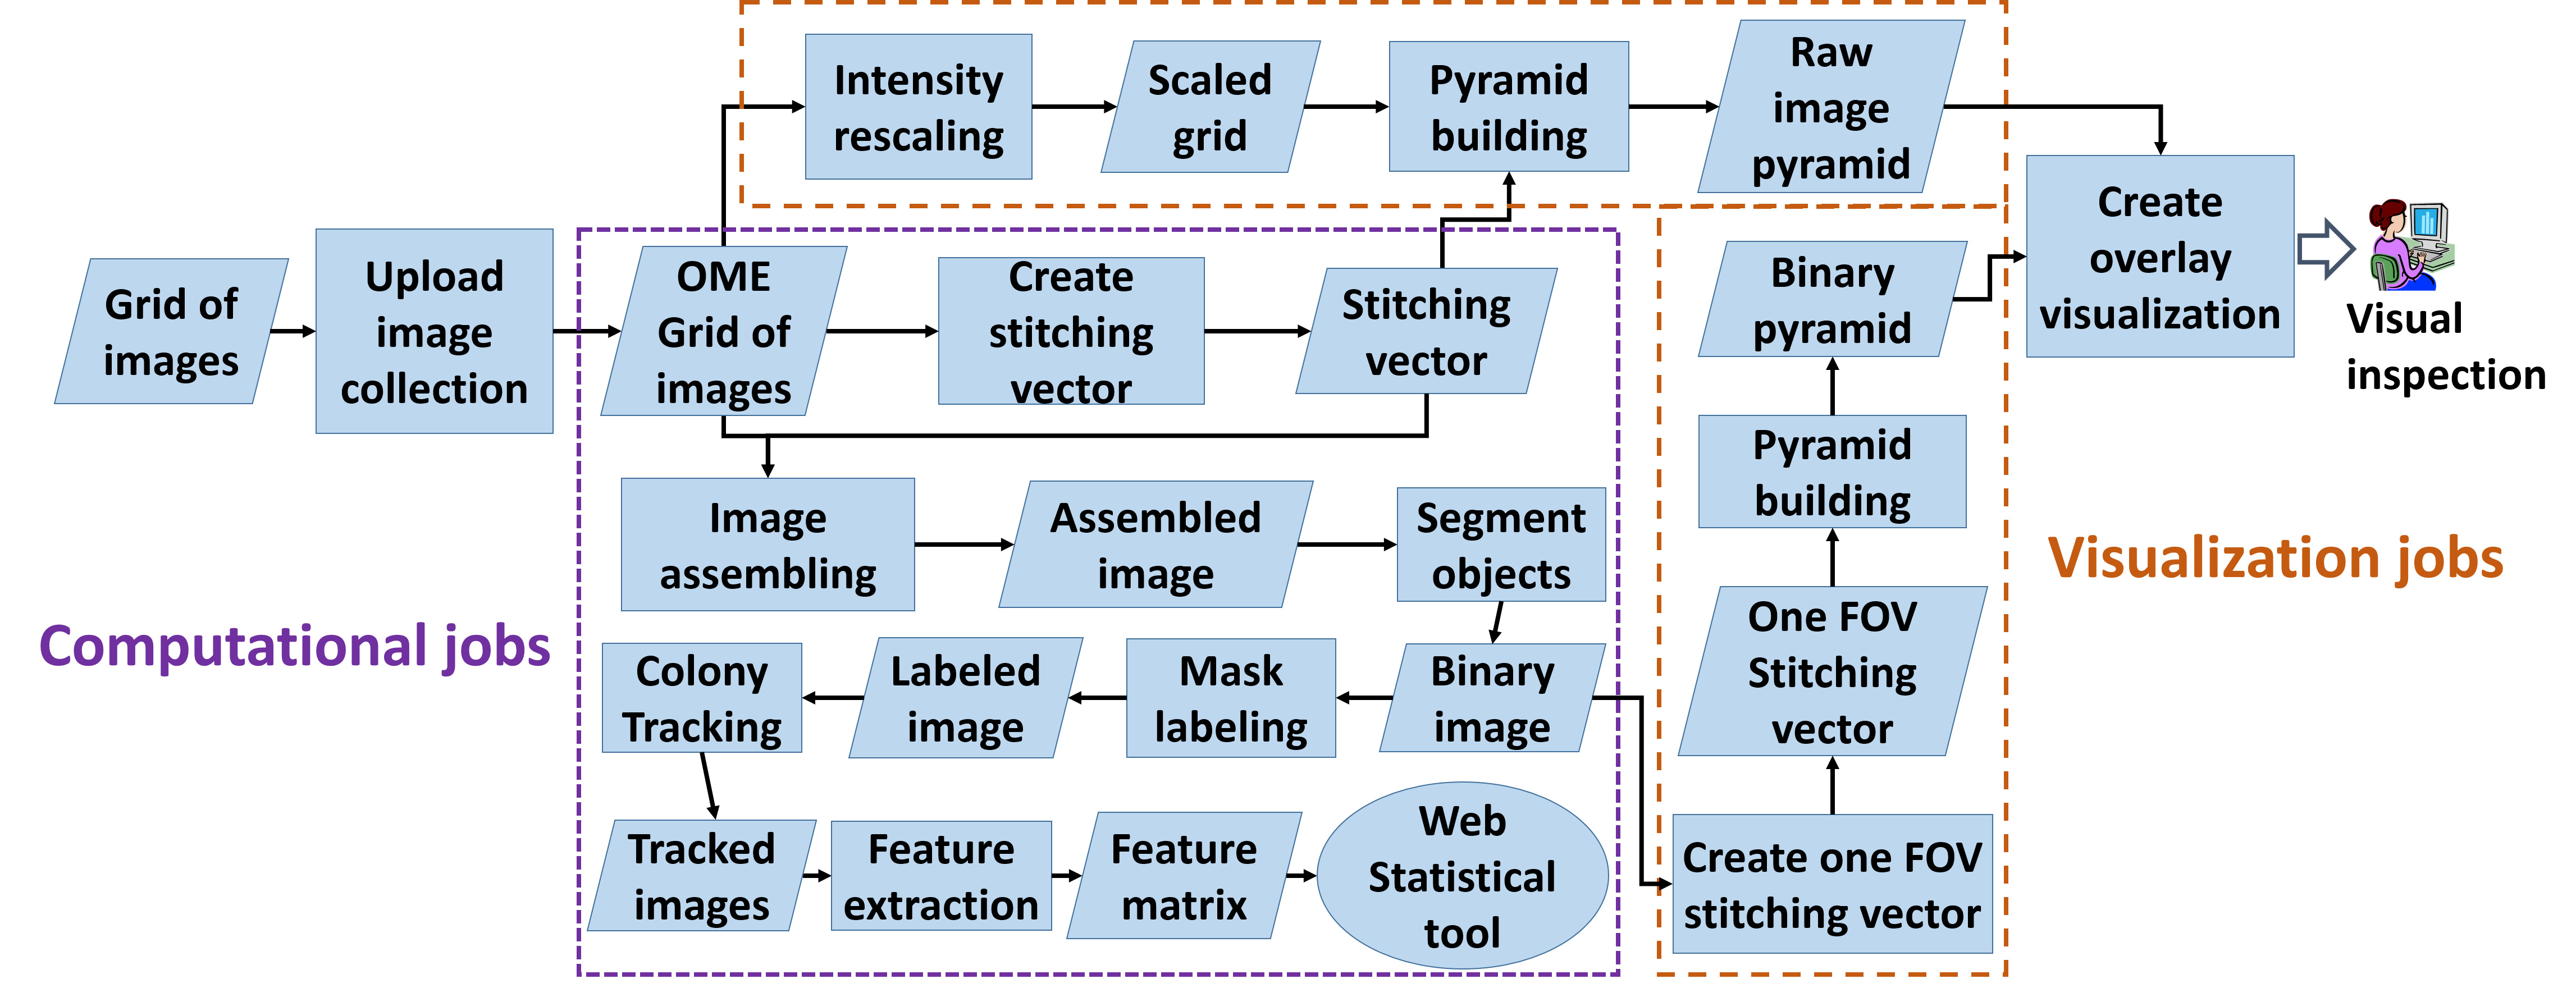 WIPP image features extraction pipeline